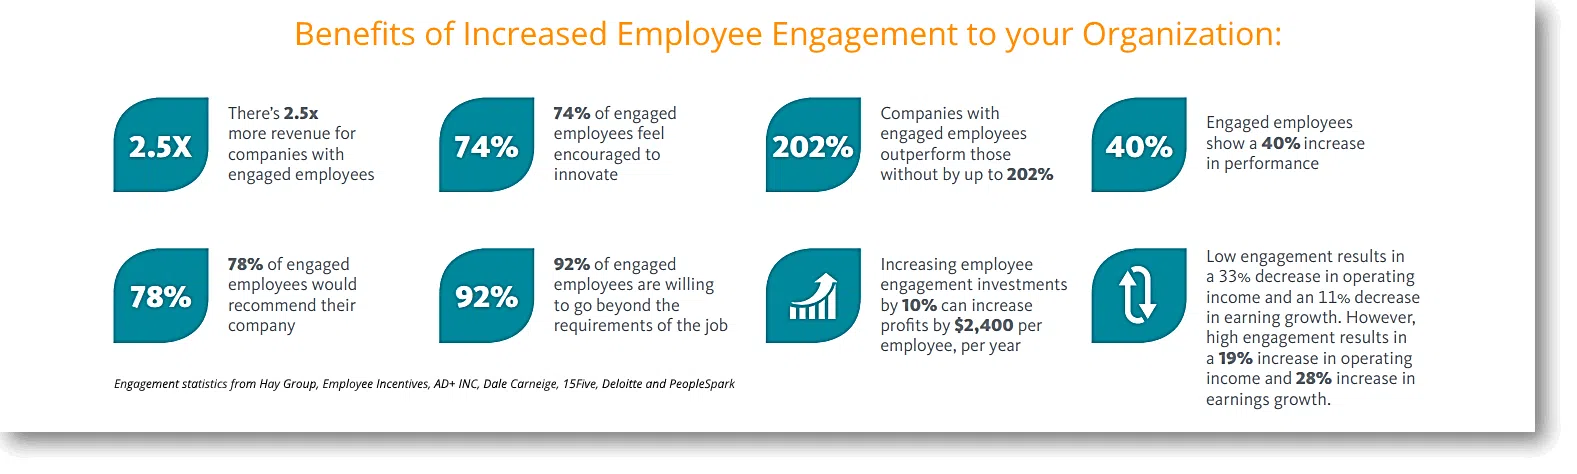 innovative employee engagement practices benefits